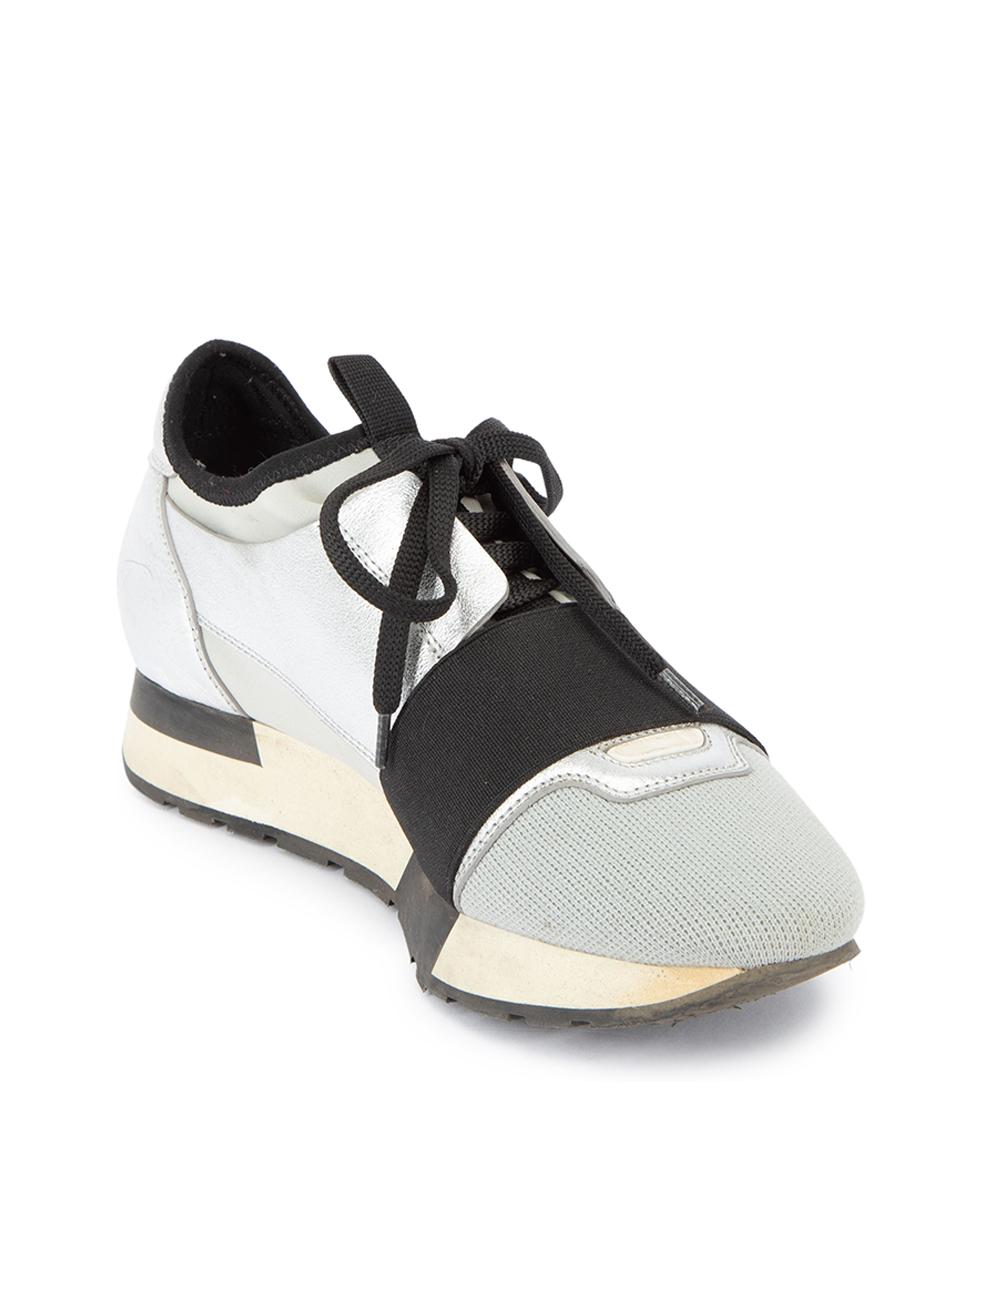 CONDITION is Very good. Minimal wear to trainers is evident. Minimal wear to the midsole which is discoloured. The knit material at the toe has some light marks and the silver material is scuffed on this used Balenciaga designer resale item. 
 
